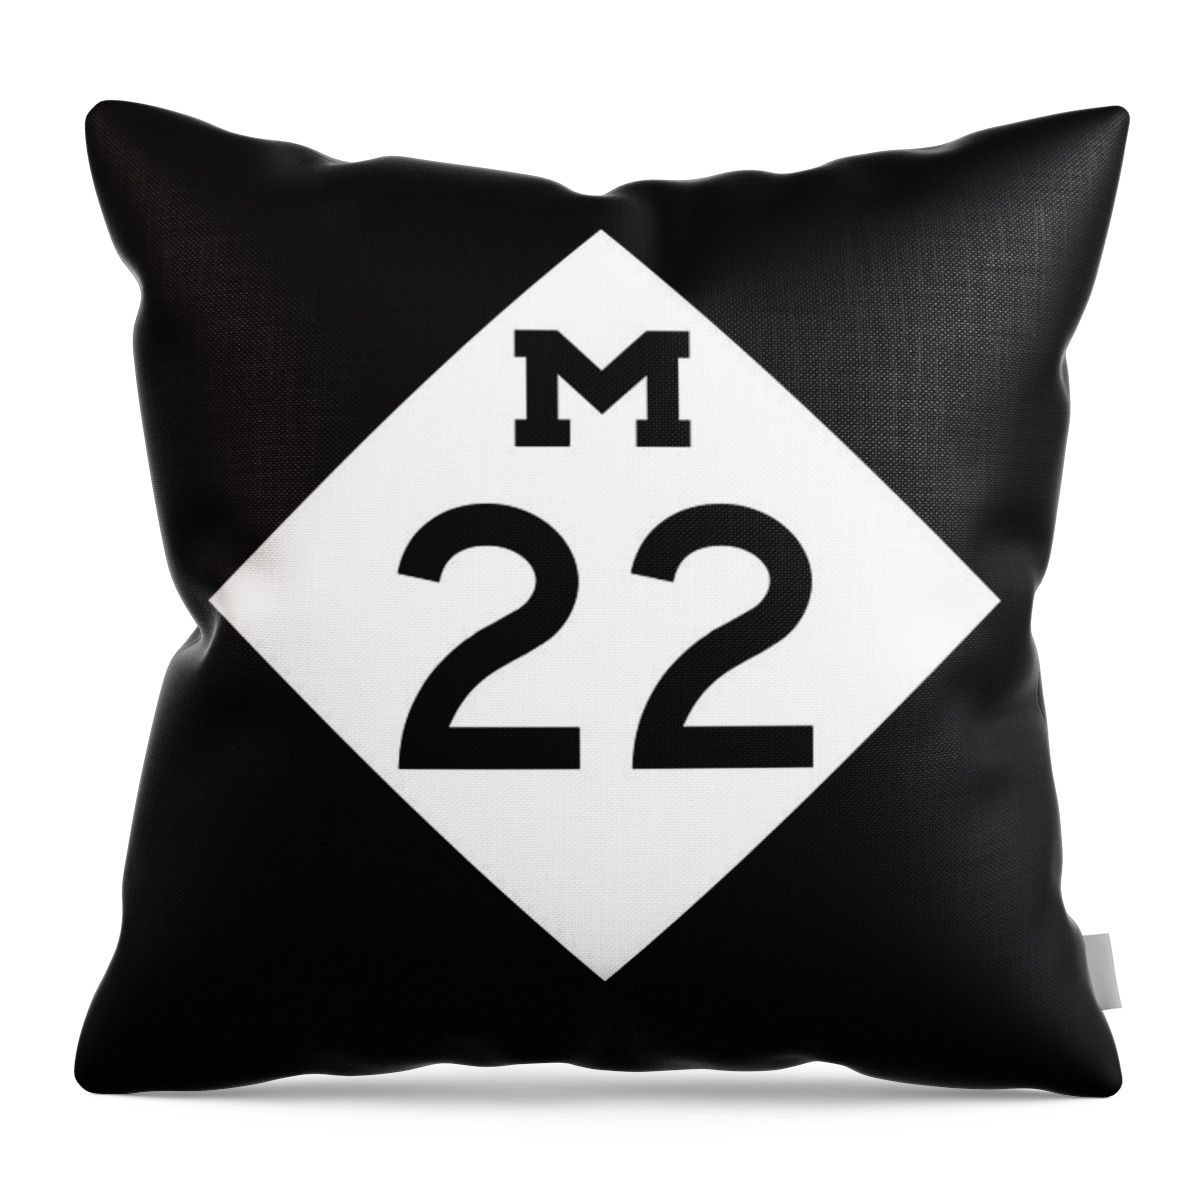 Michigan Throw Pillow featuring the photograph M 22 by Sebastian Musial